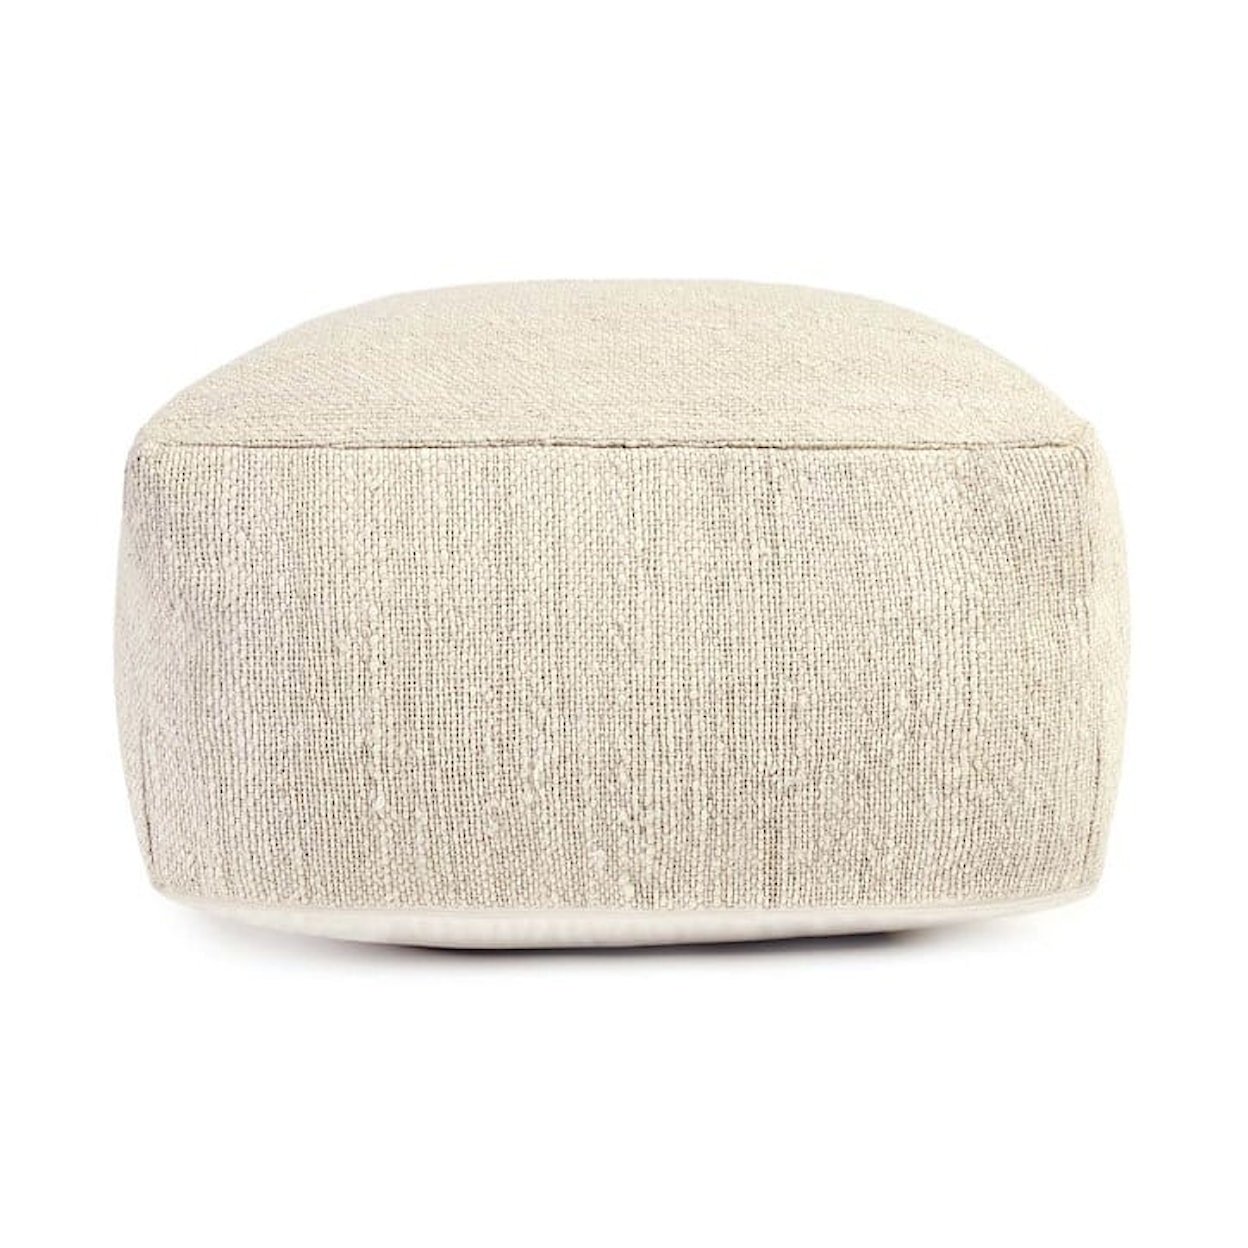 Classic Home Floor Cushions HALTER IVORY POUF